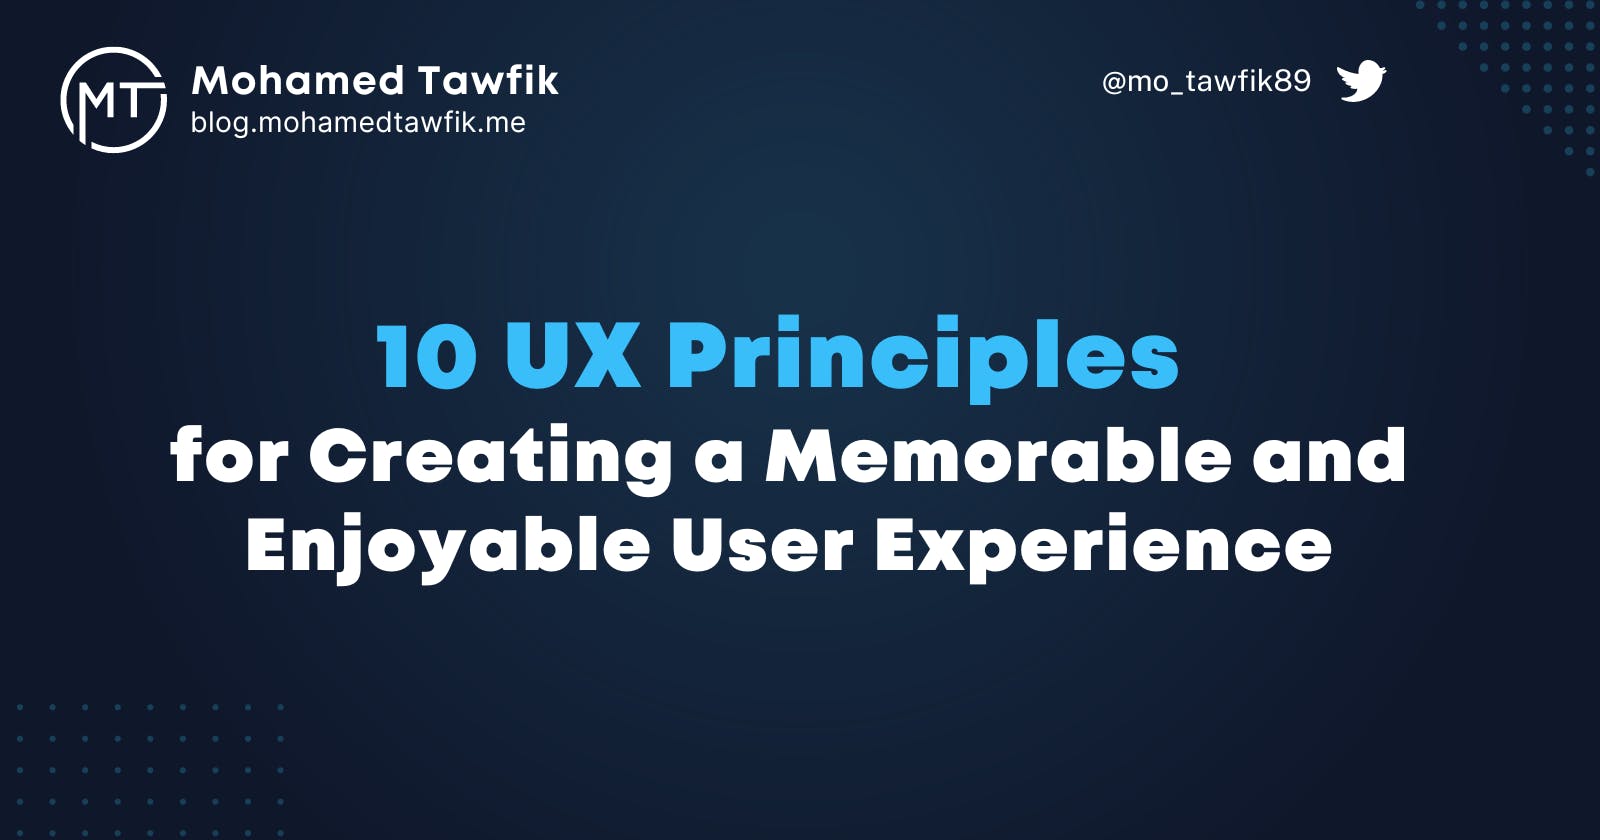 10 UX Principles for Creating a Memorable and Enjoyable User Experience